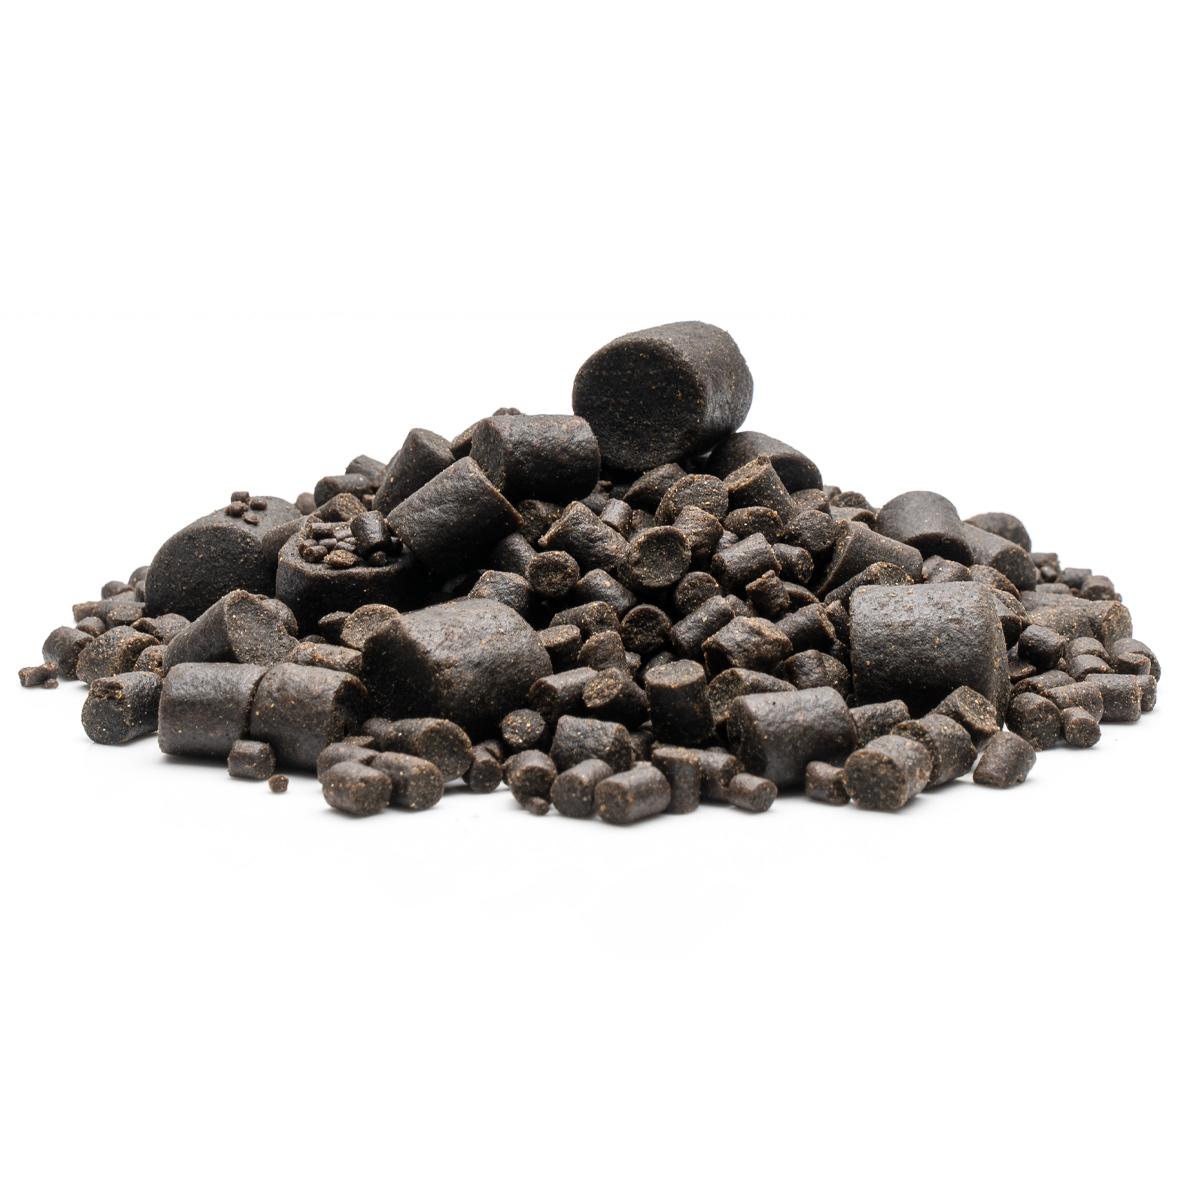 Coppens Premium Select Pellets (2mm, 4mm, 6mm & 8mm) Zoomed